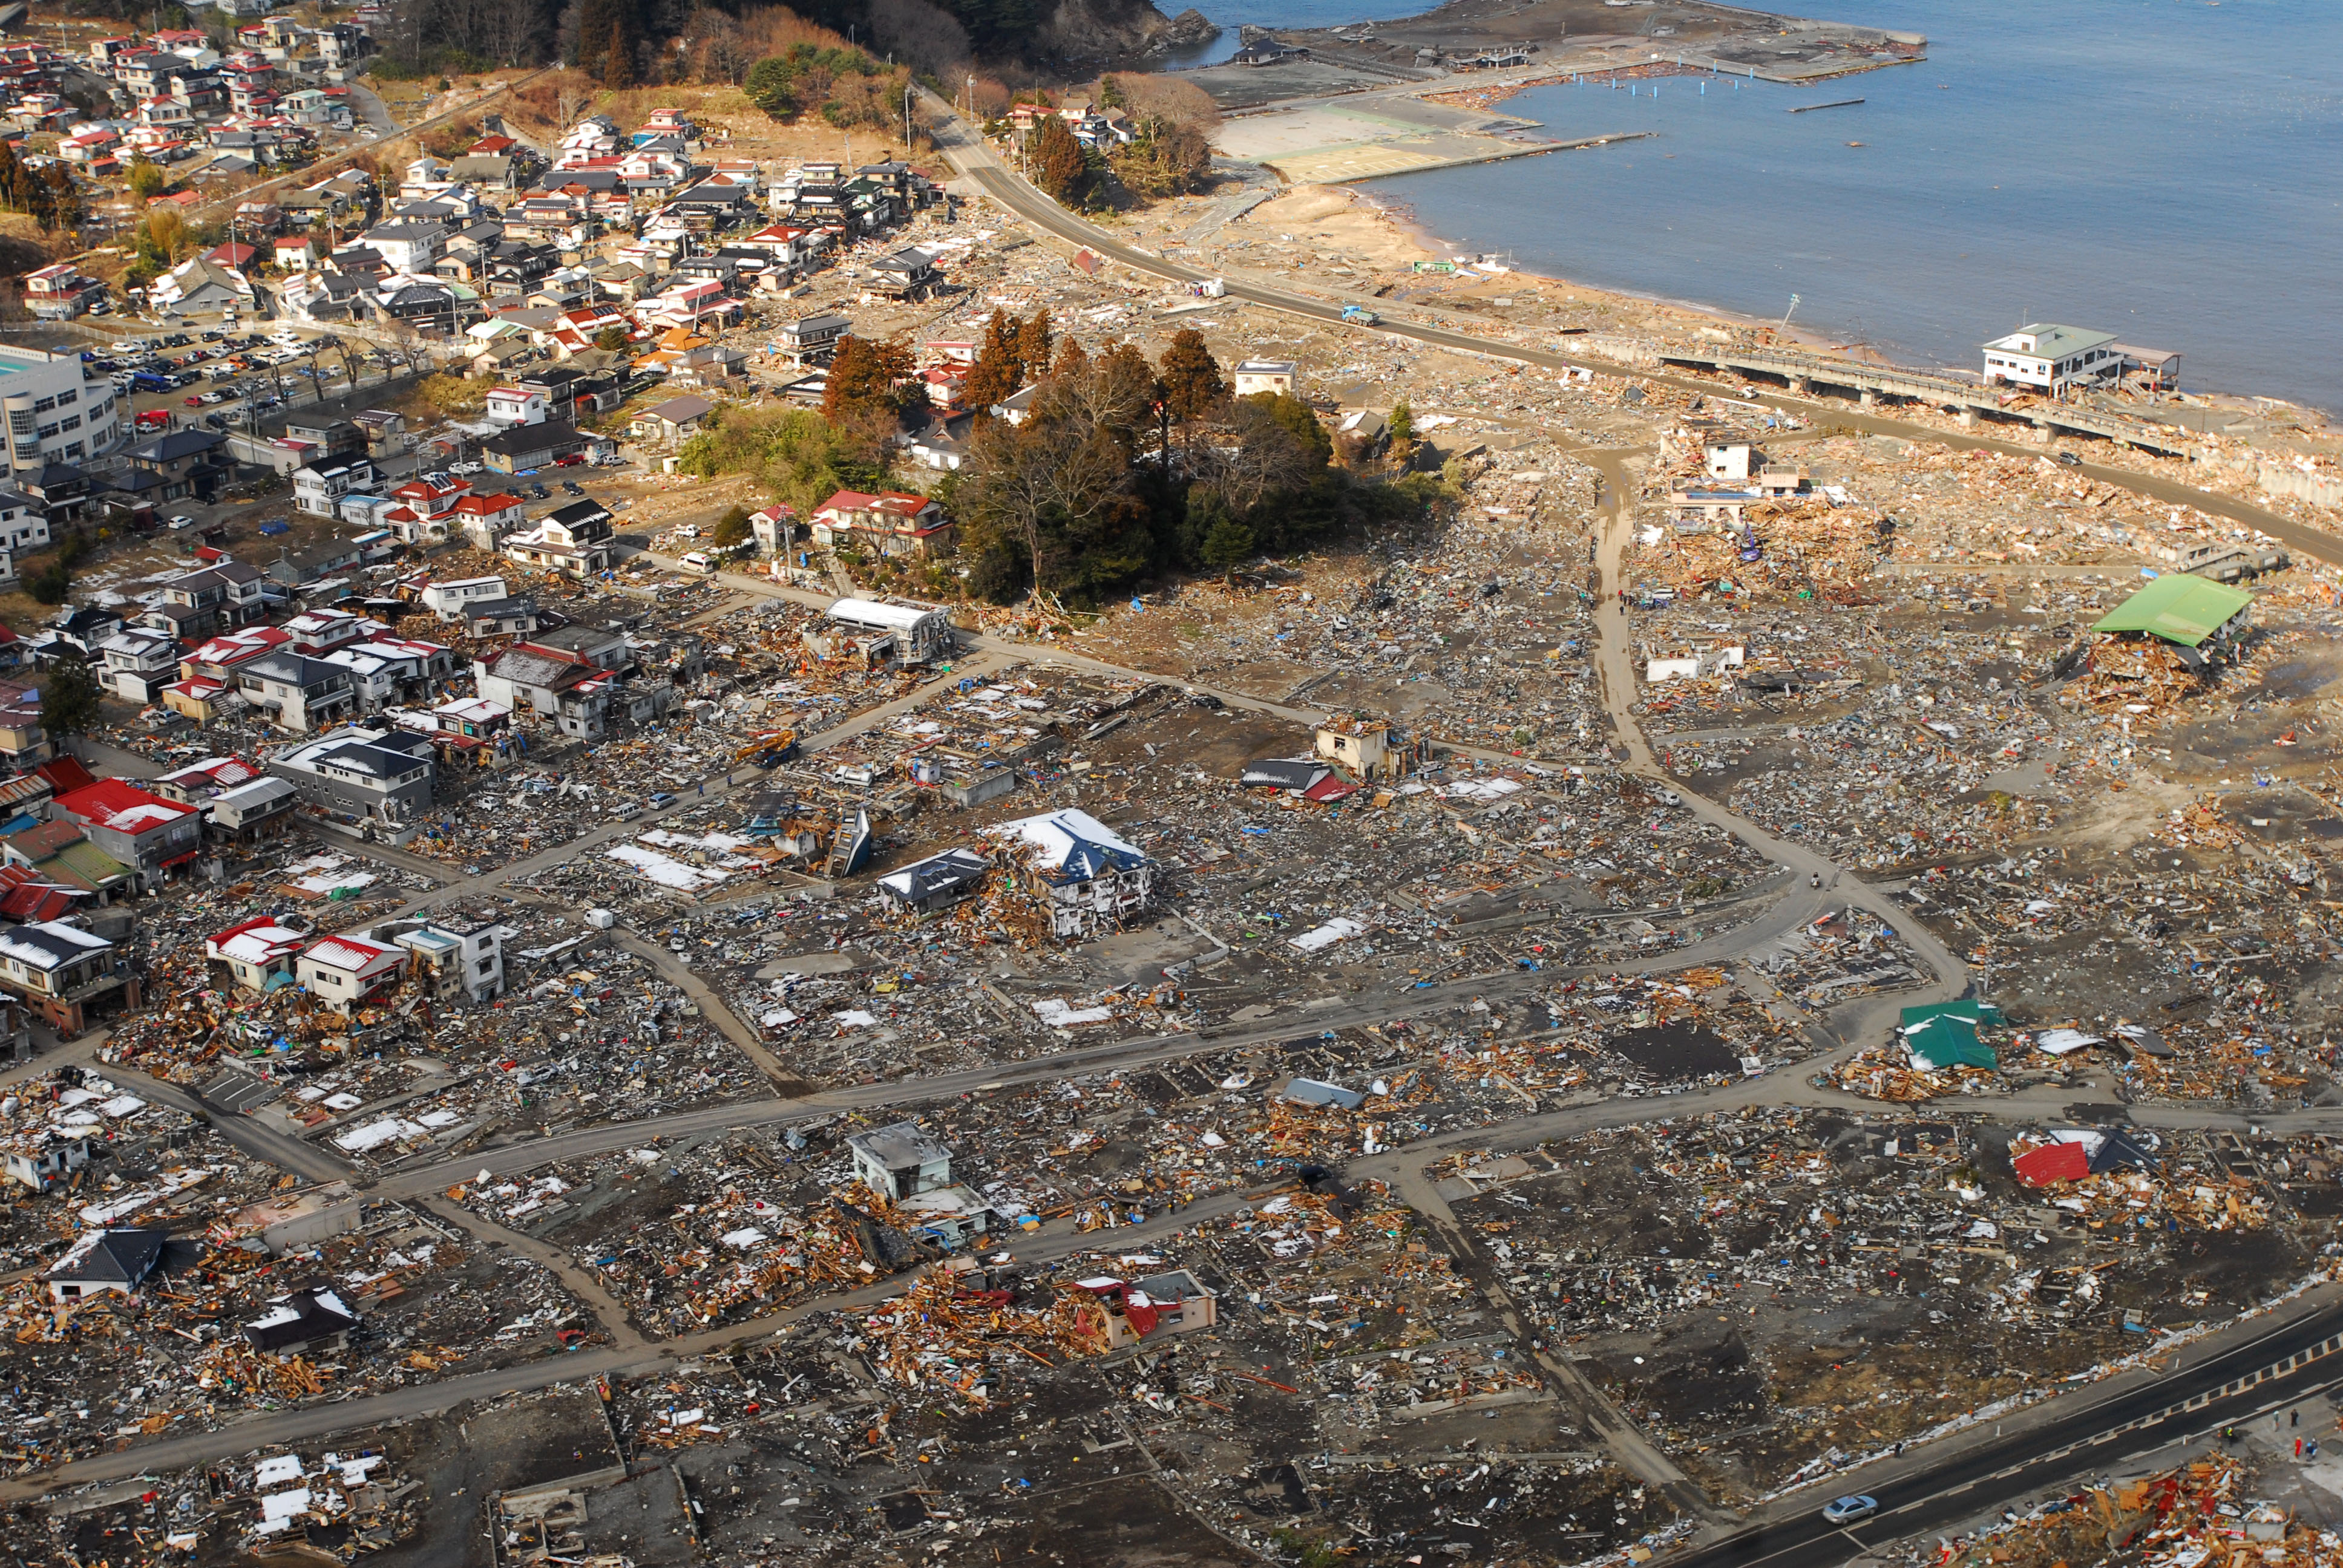 Aerial view overlooking a city in Japan after the Tōhoku tsunami flooded the land and destroyed many of the buildings.